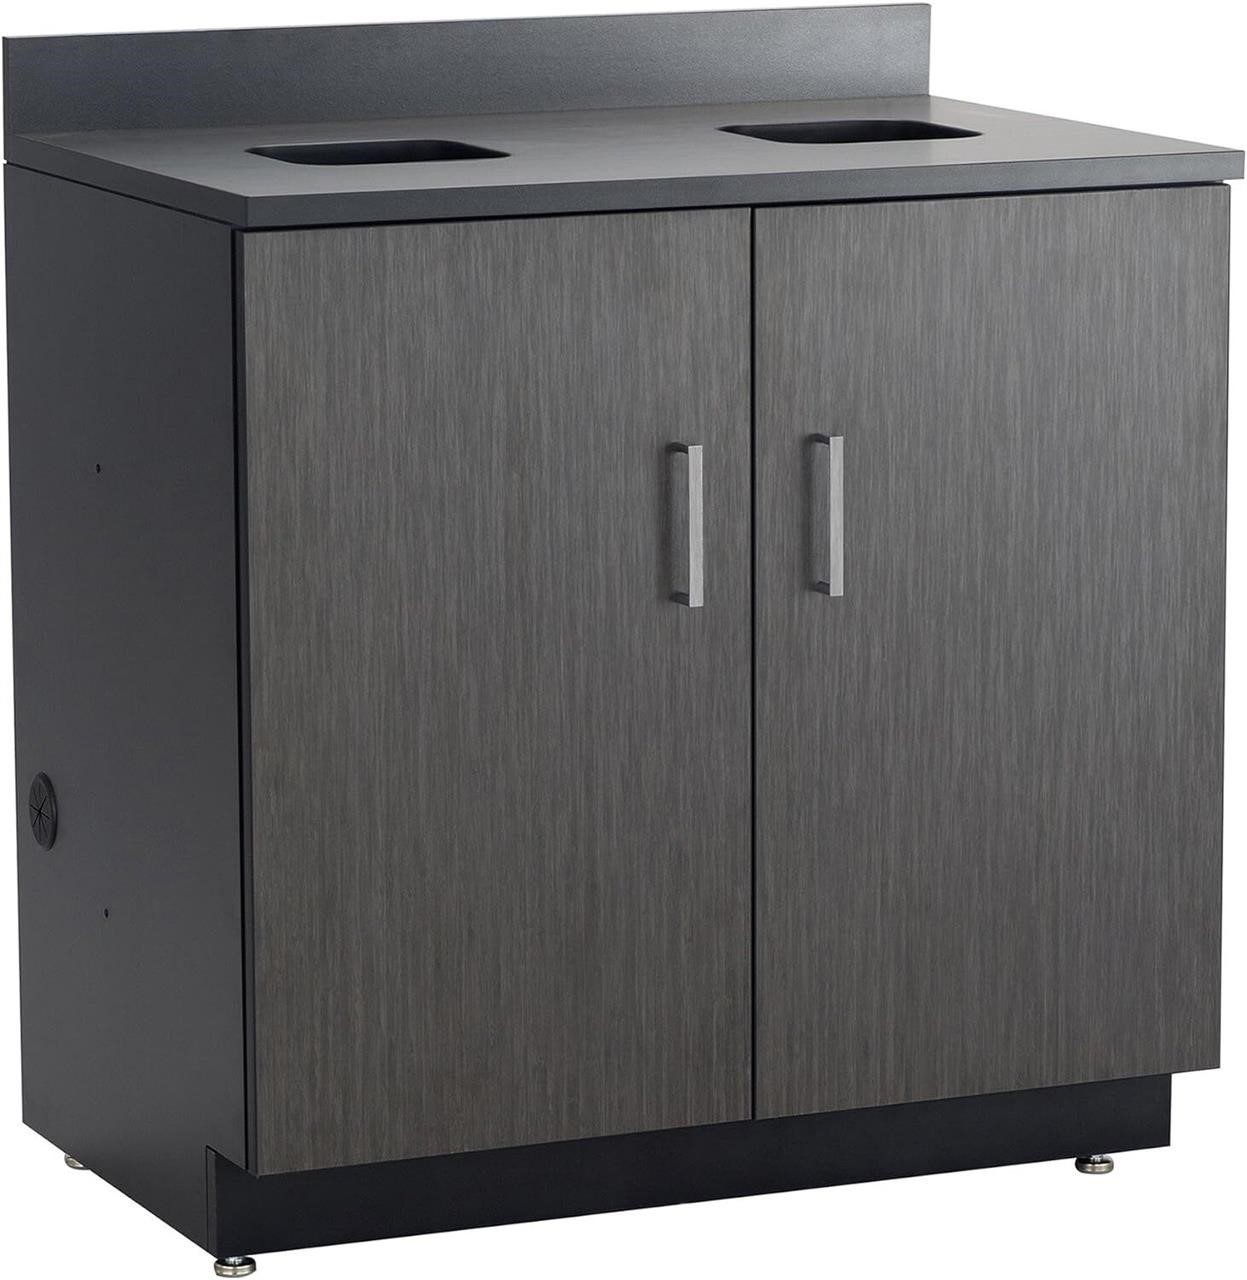 Safco Cabinet 25D x 36W x 39H Asian Night